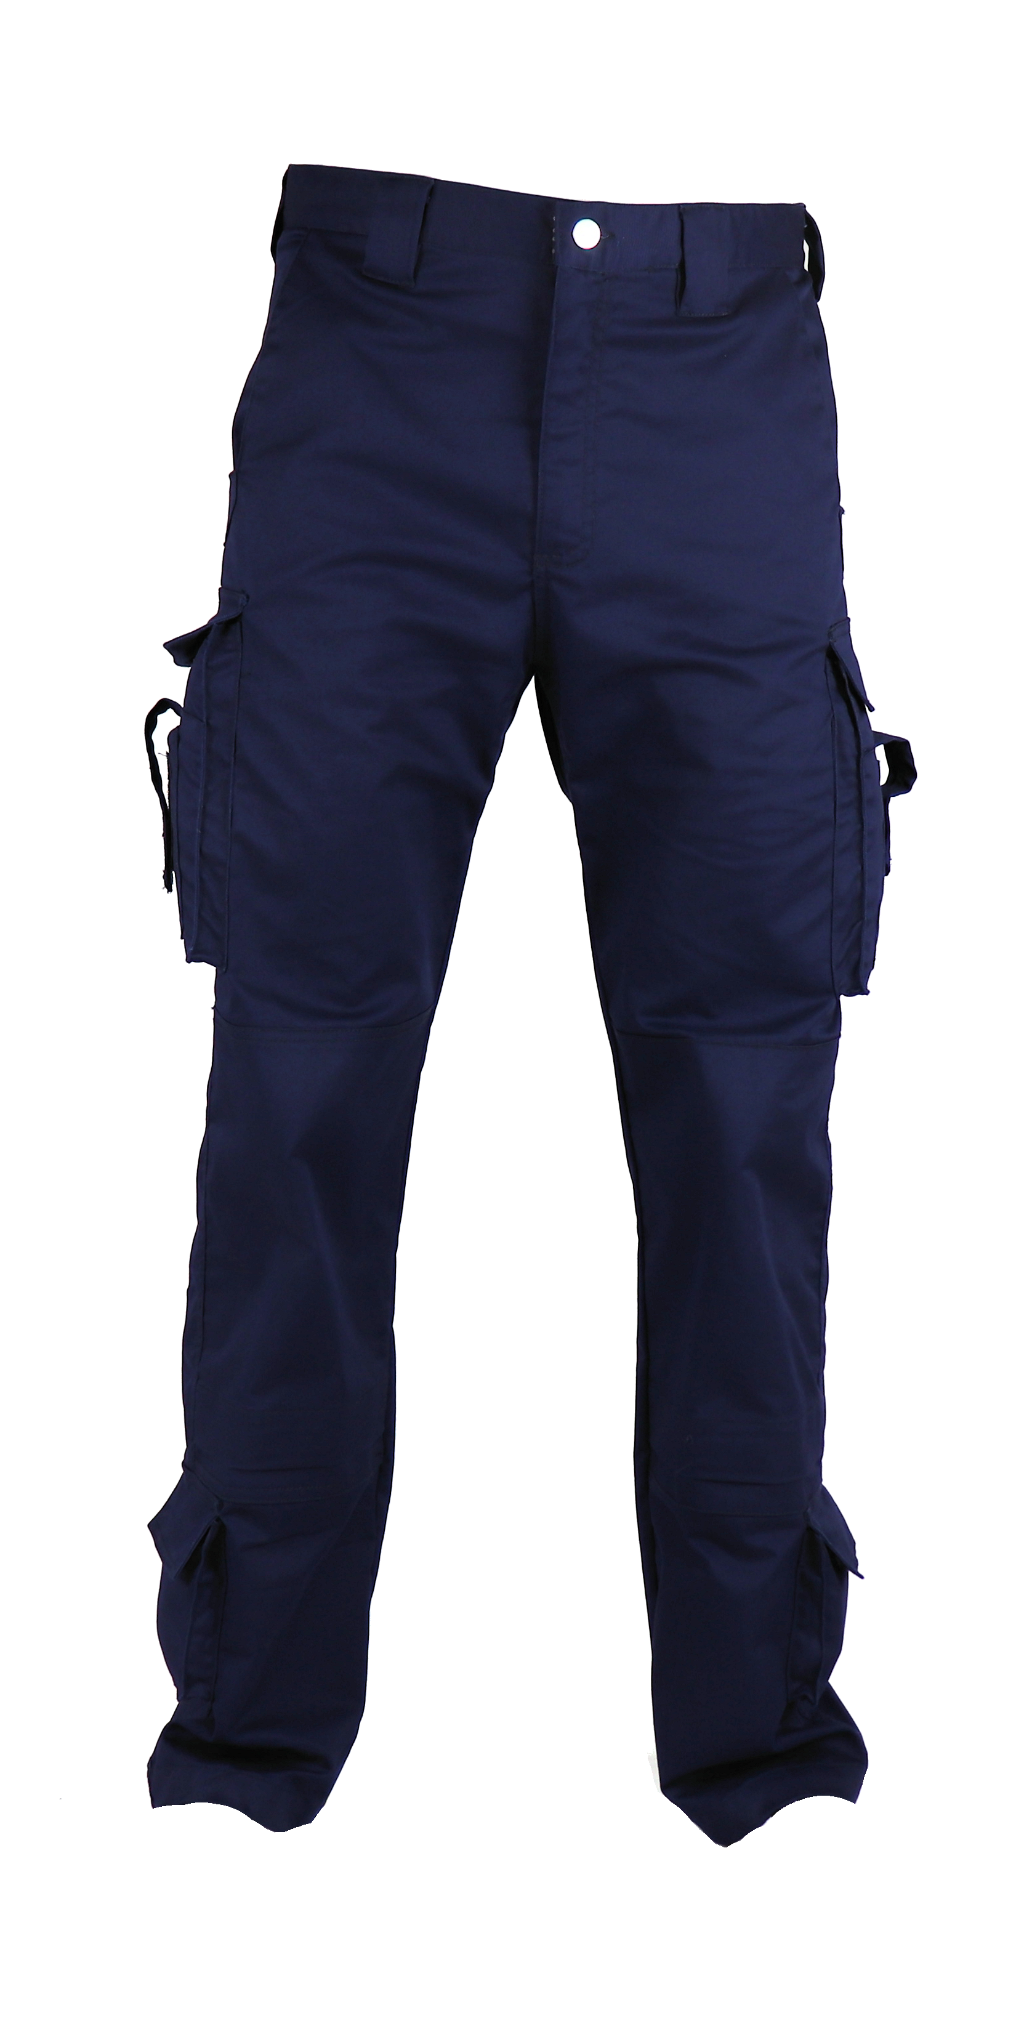 Class A Fast-Tac Twill Pant - Durable & Comfortable